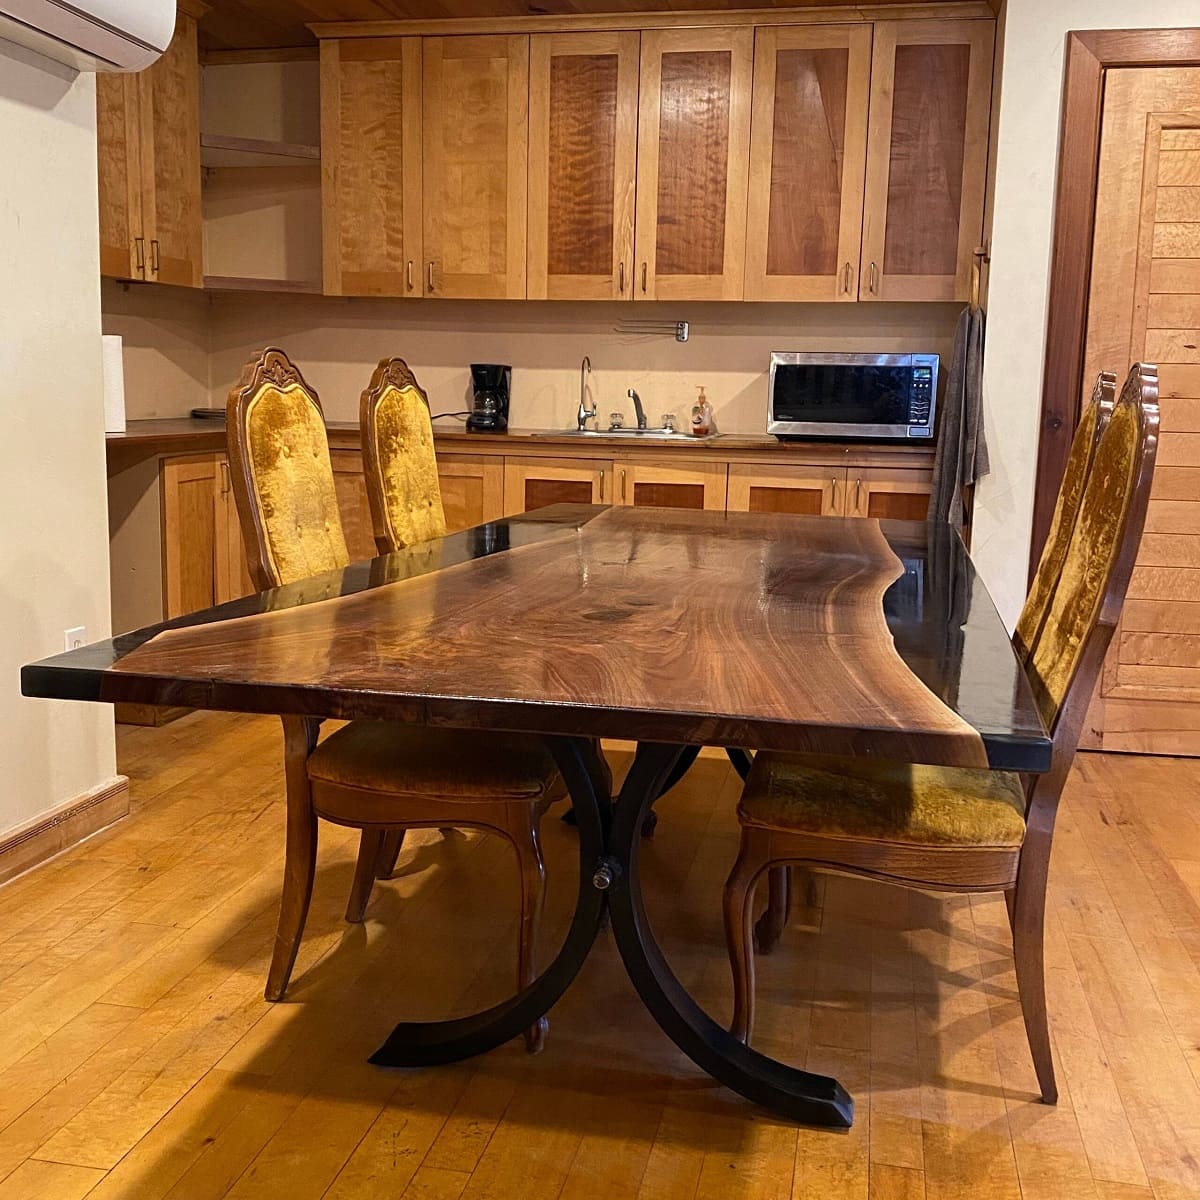 How Many Guests Can An 8-Foot Dining Table Seat?